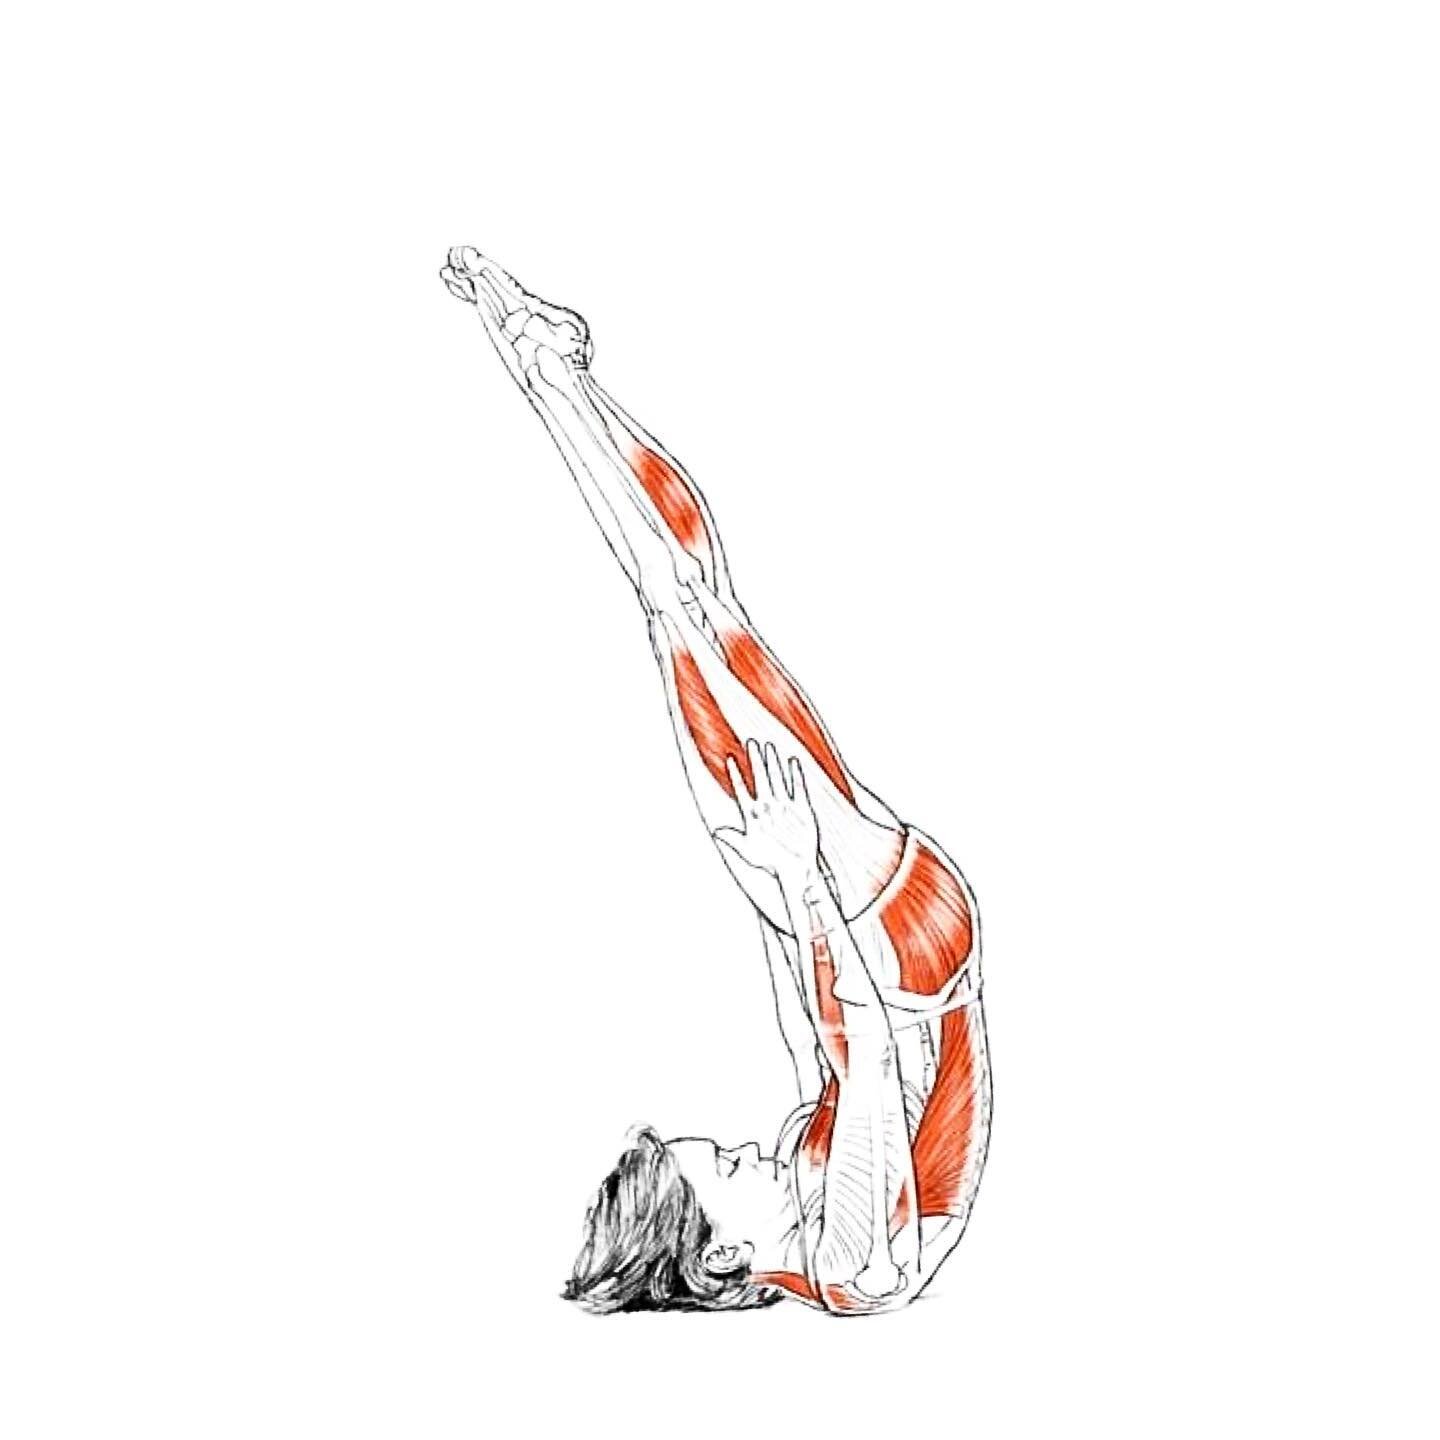 🕯 Salamba Sarvangasana or candle pose or shoulder stand is such a playful inversion that stretches our your shoulders, strengthens our limbs and gets the blood flowing back to the heart. But even more, it&rsquo;s supposed to help with irritability! 